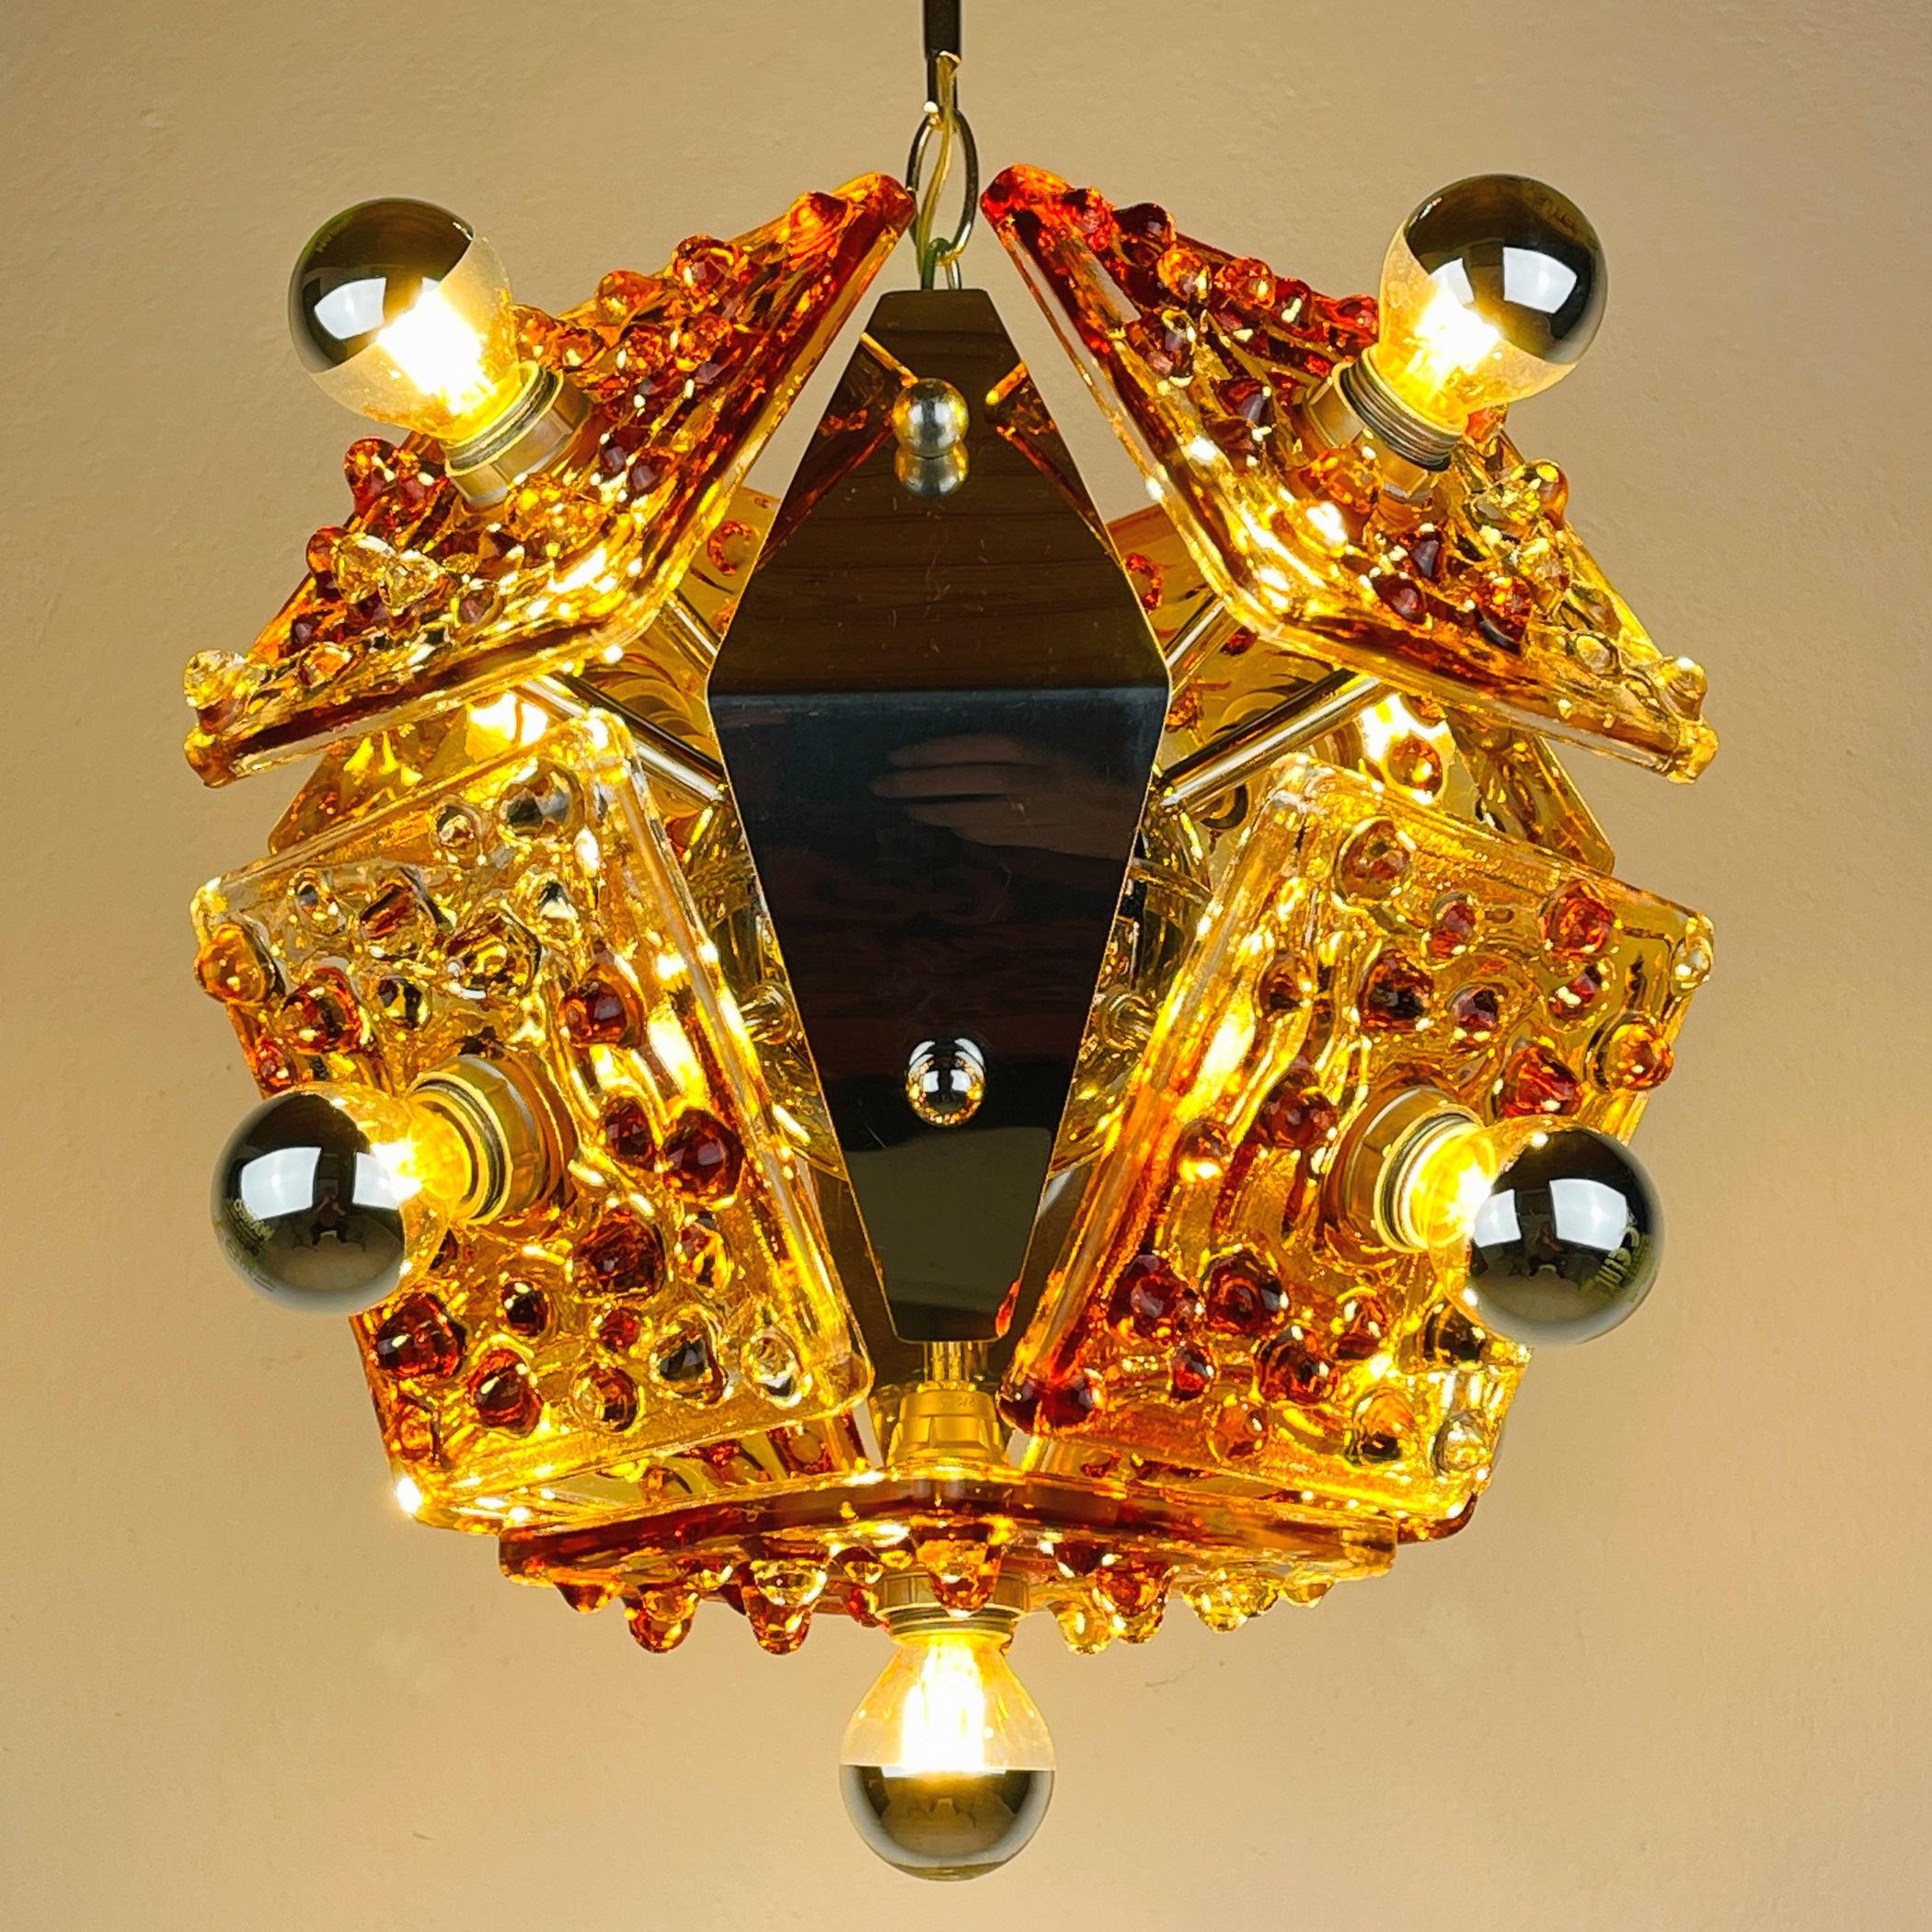 Step into a world of timeless sophistication with this mid-century amber Murano chandelier, a dazzling creation by AV Mazzega, crafted in Italy during the 1970s. Let the warm glow of its exquisite Murano glass infuse your space with an air of